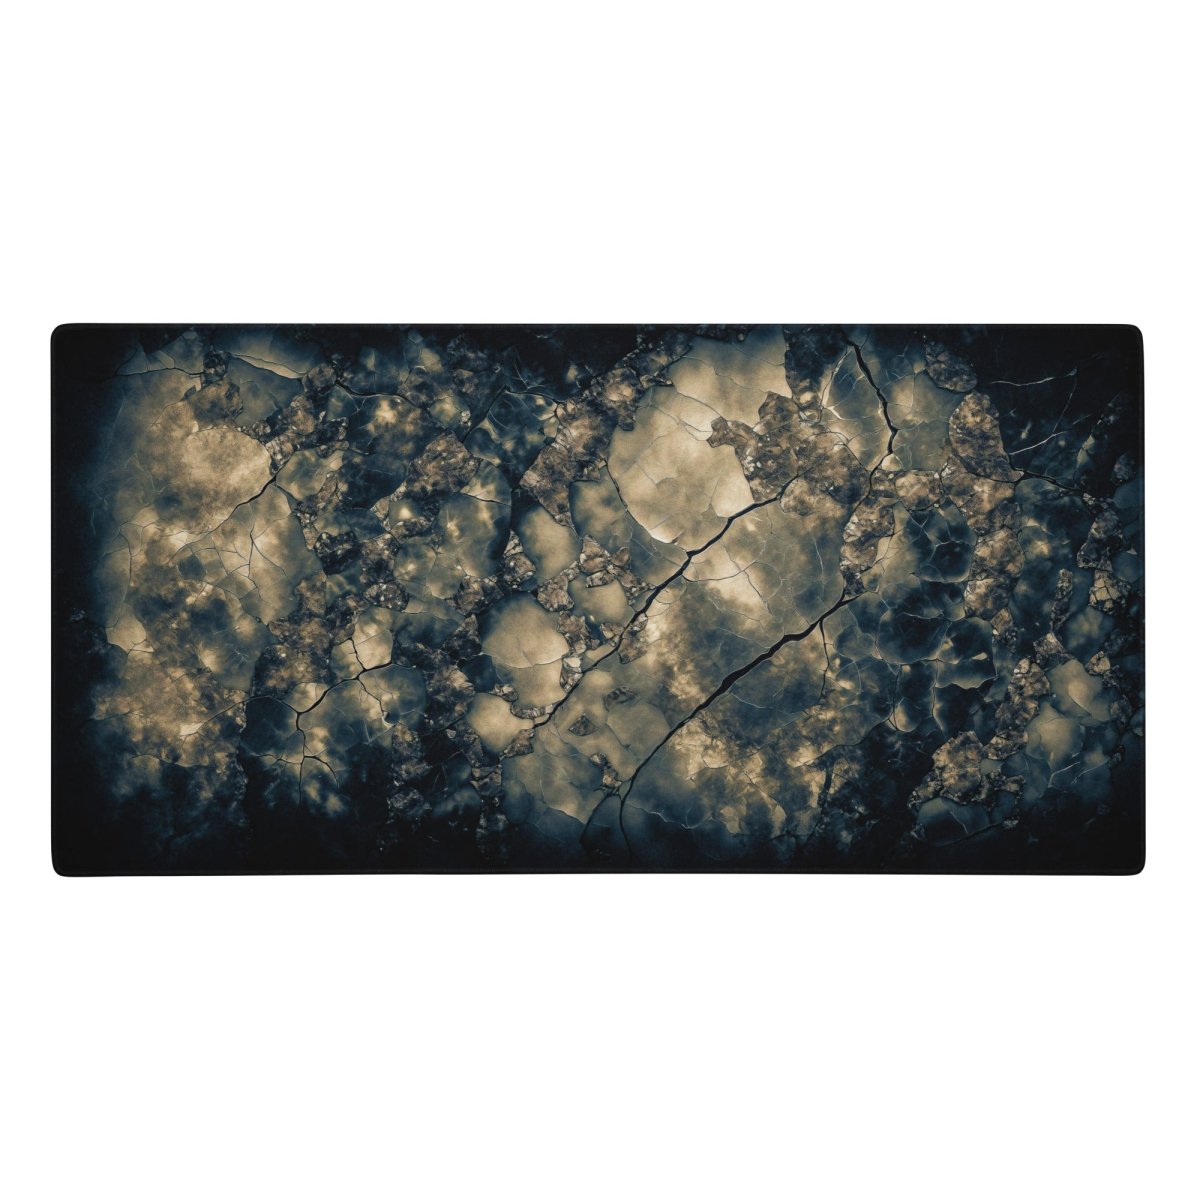 Crystalized earth - Gaming mouse pad - Ever colorful